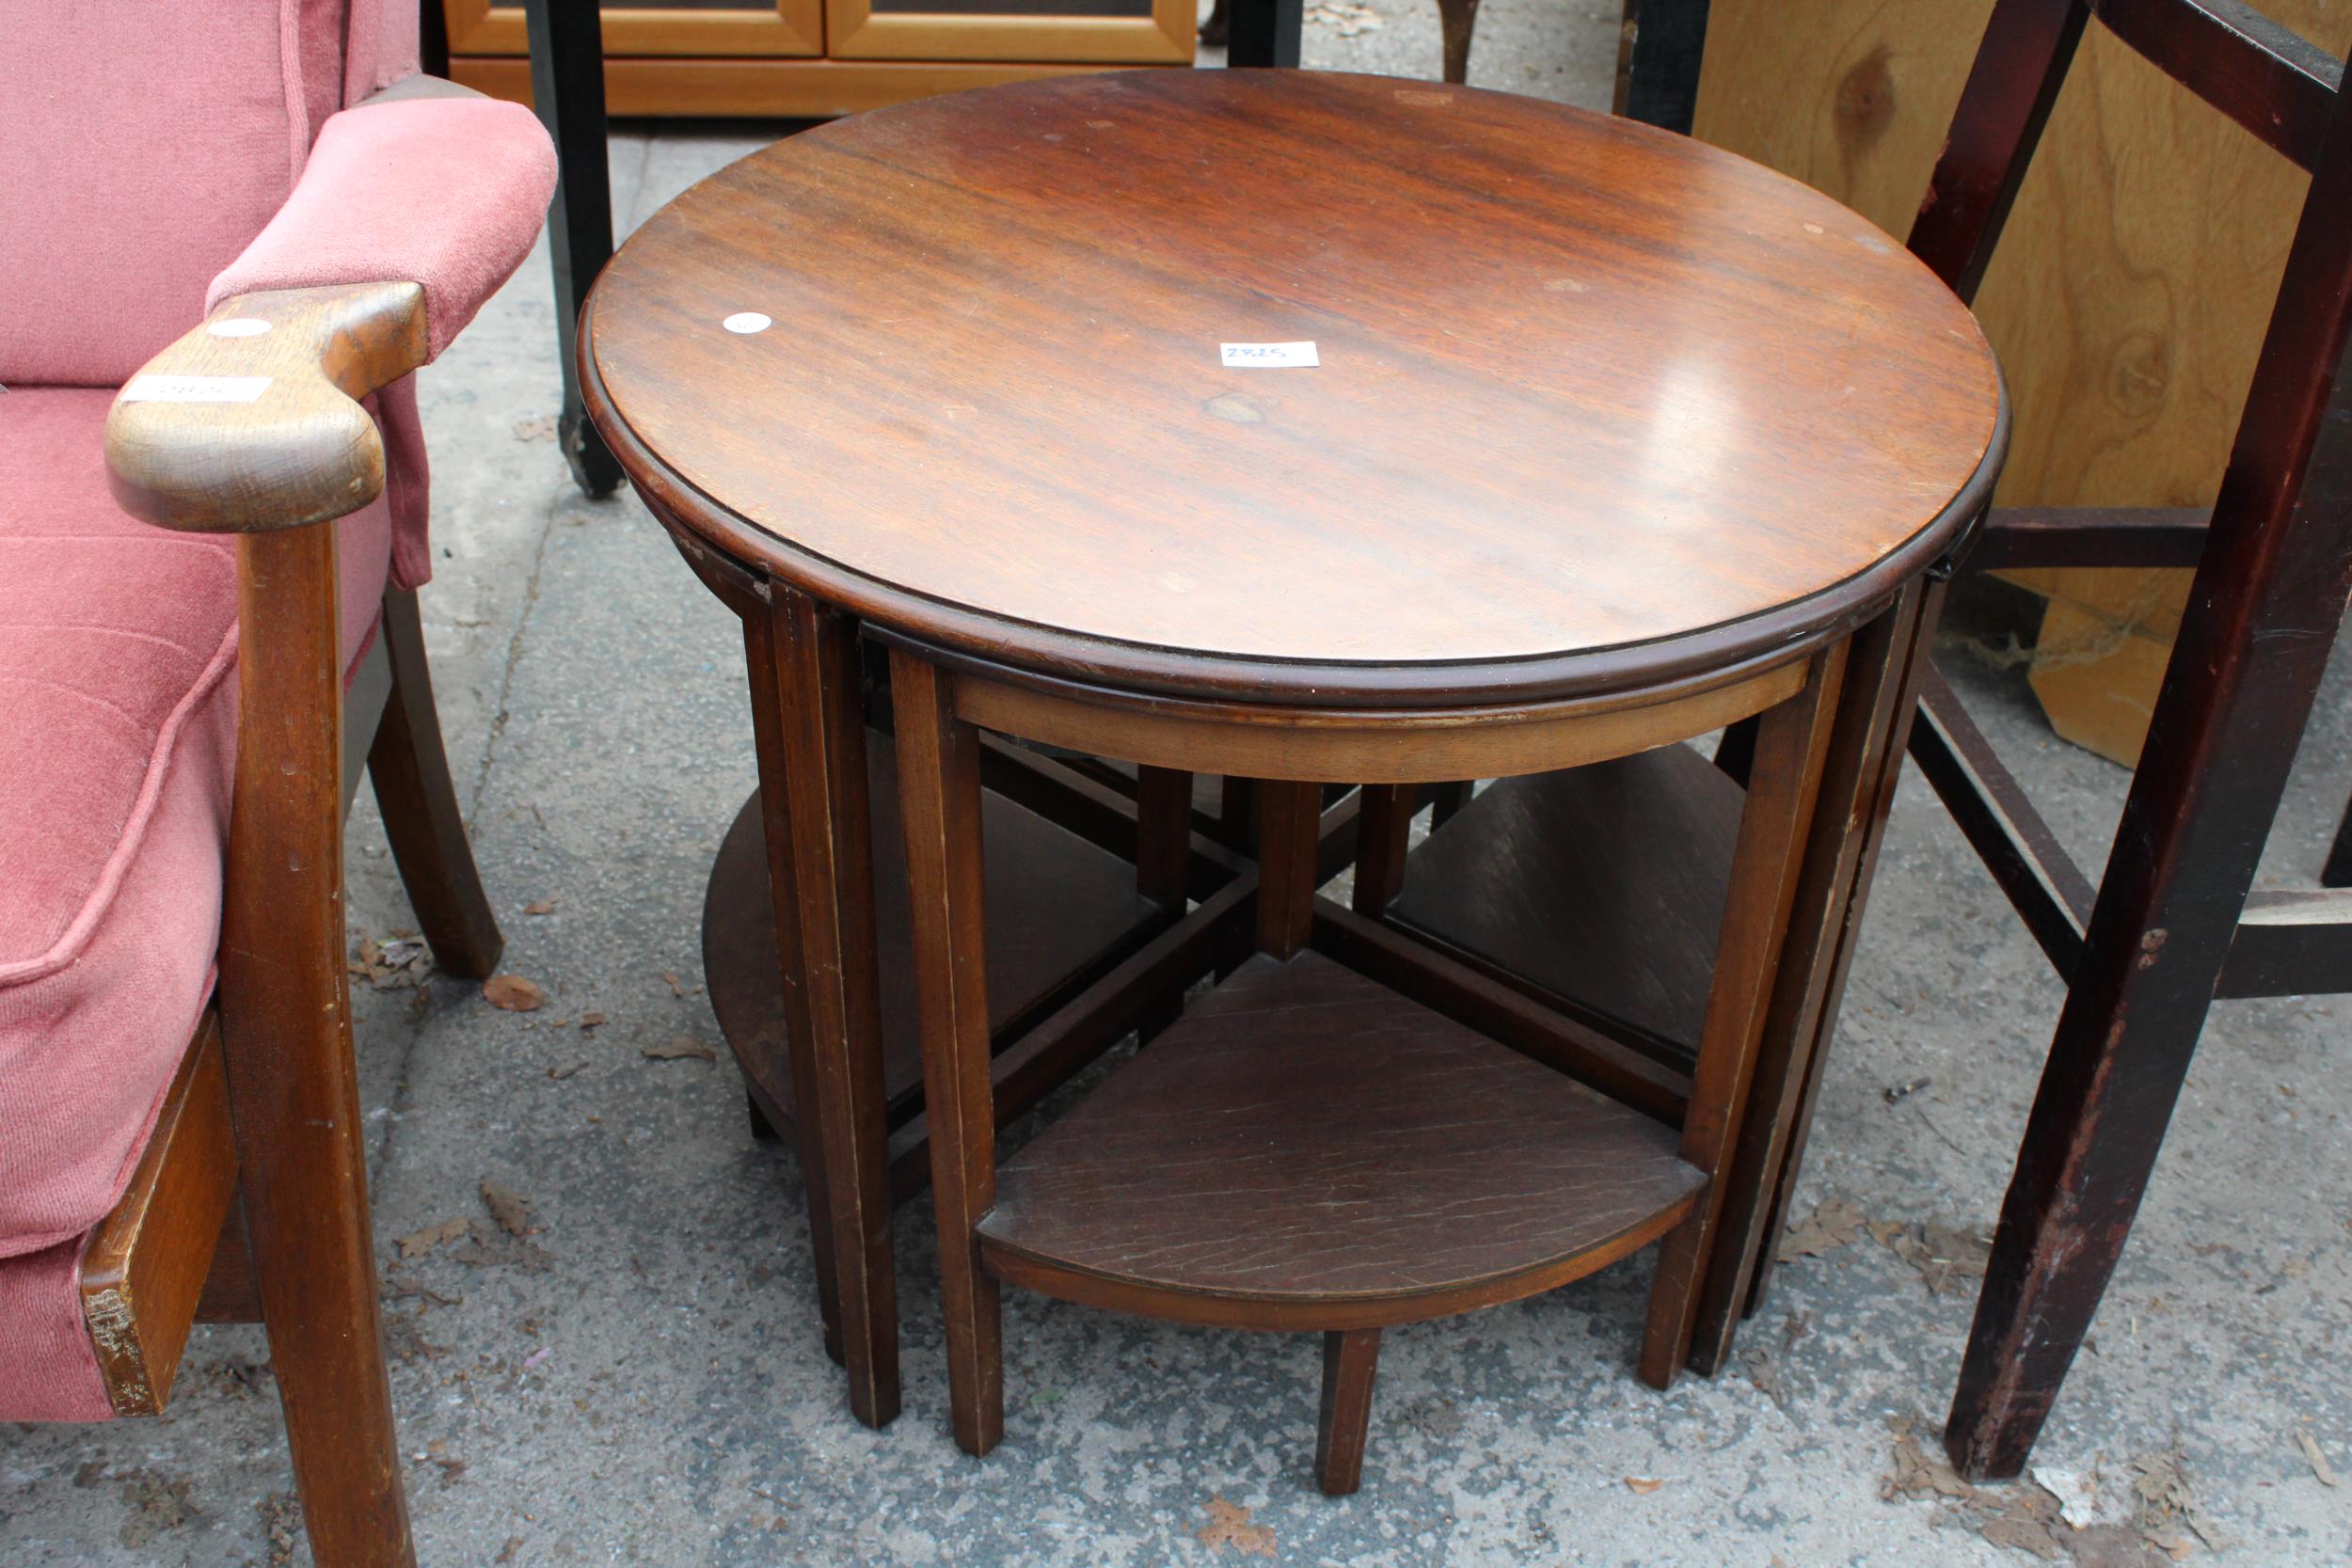 A MID 20TH CENTURY 23.5" DIAMETER NEST OF FIVE TABLES